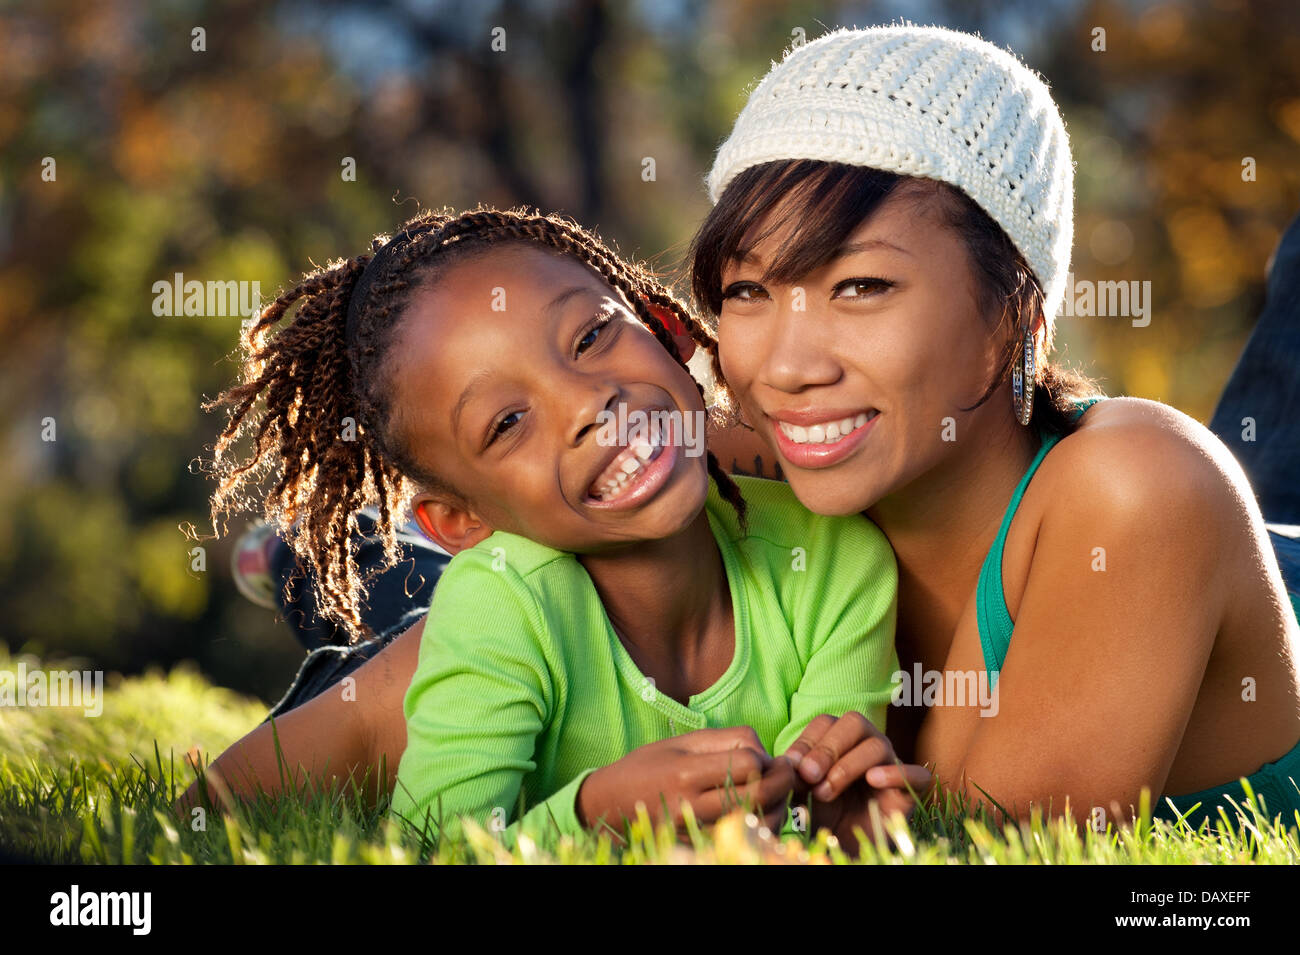 Happy child enjoying spending time in a park with her mother Stock Photo